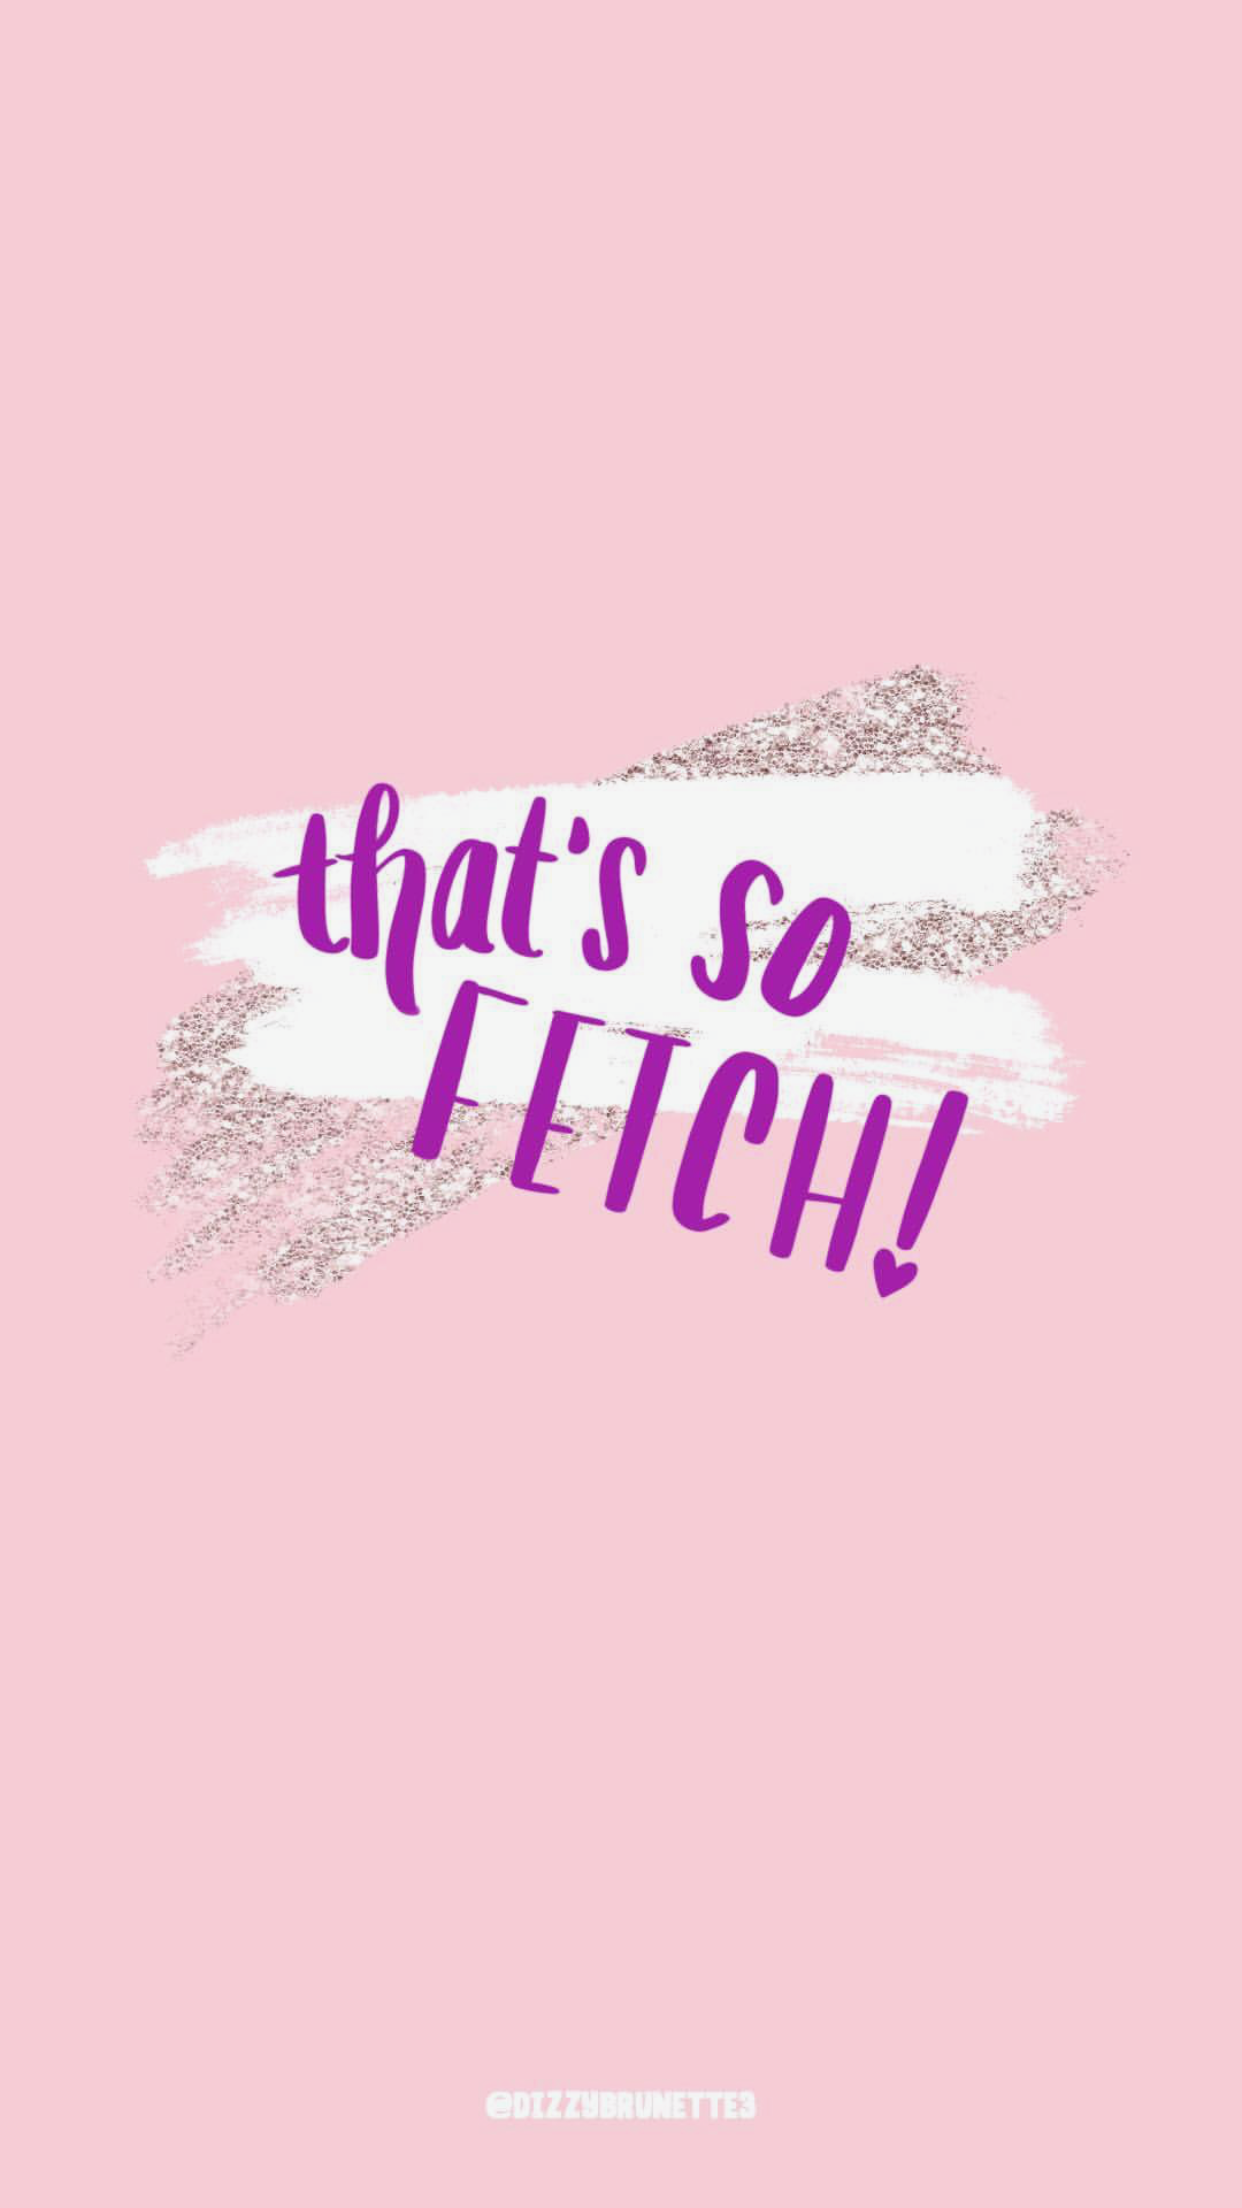 Wallpaper. Mean girl quotes, iPhone wallpaper quotes funny, Free phone wallpaper